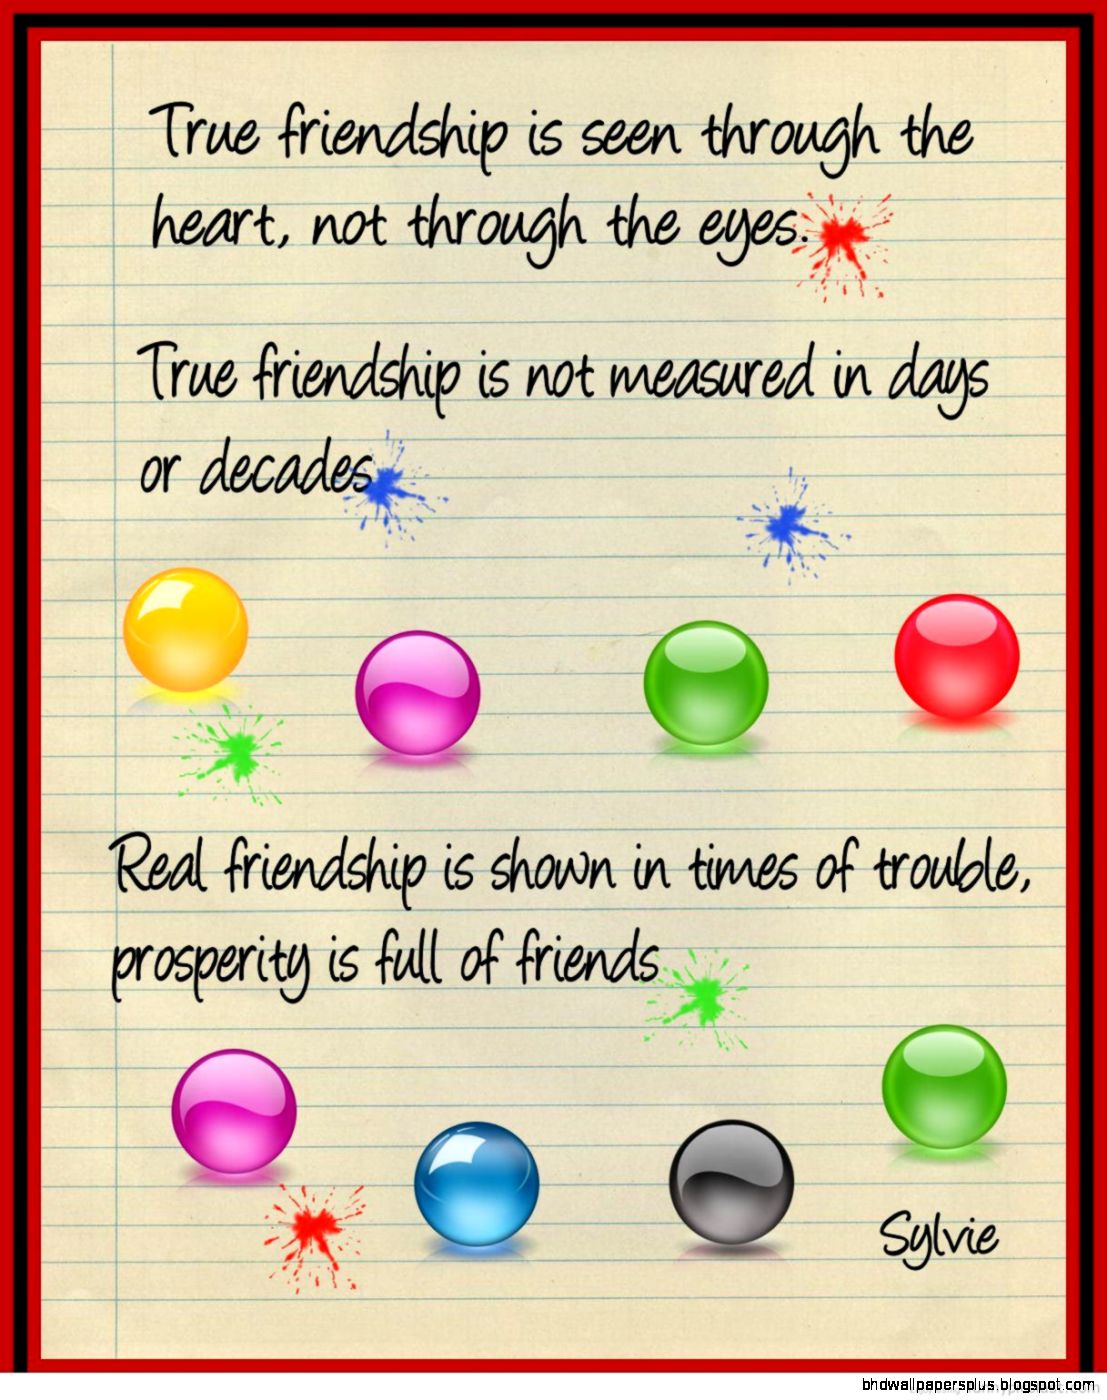 Friendship Quotes Zedge | HD Wallpapers Plus